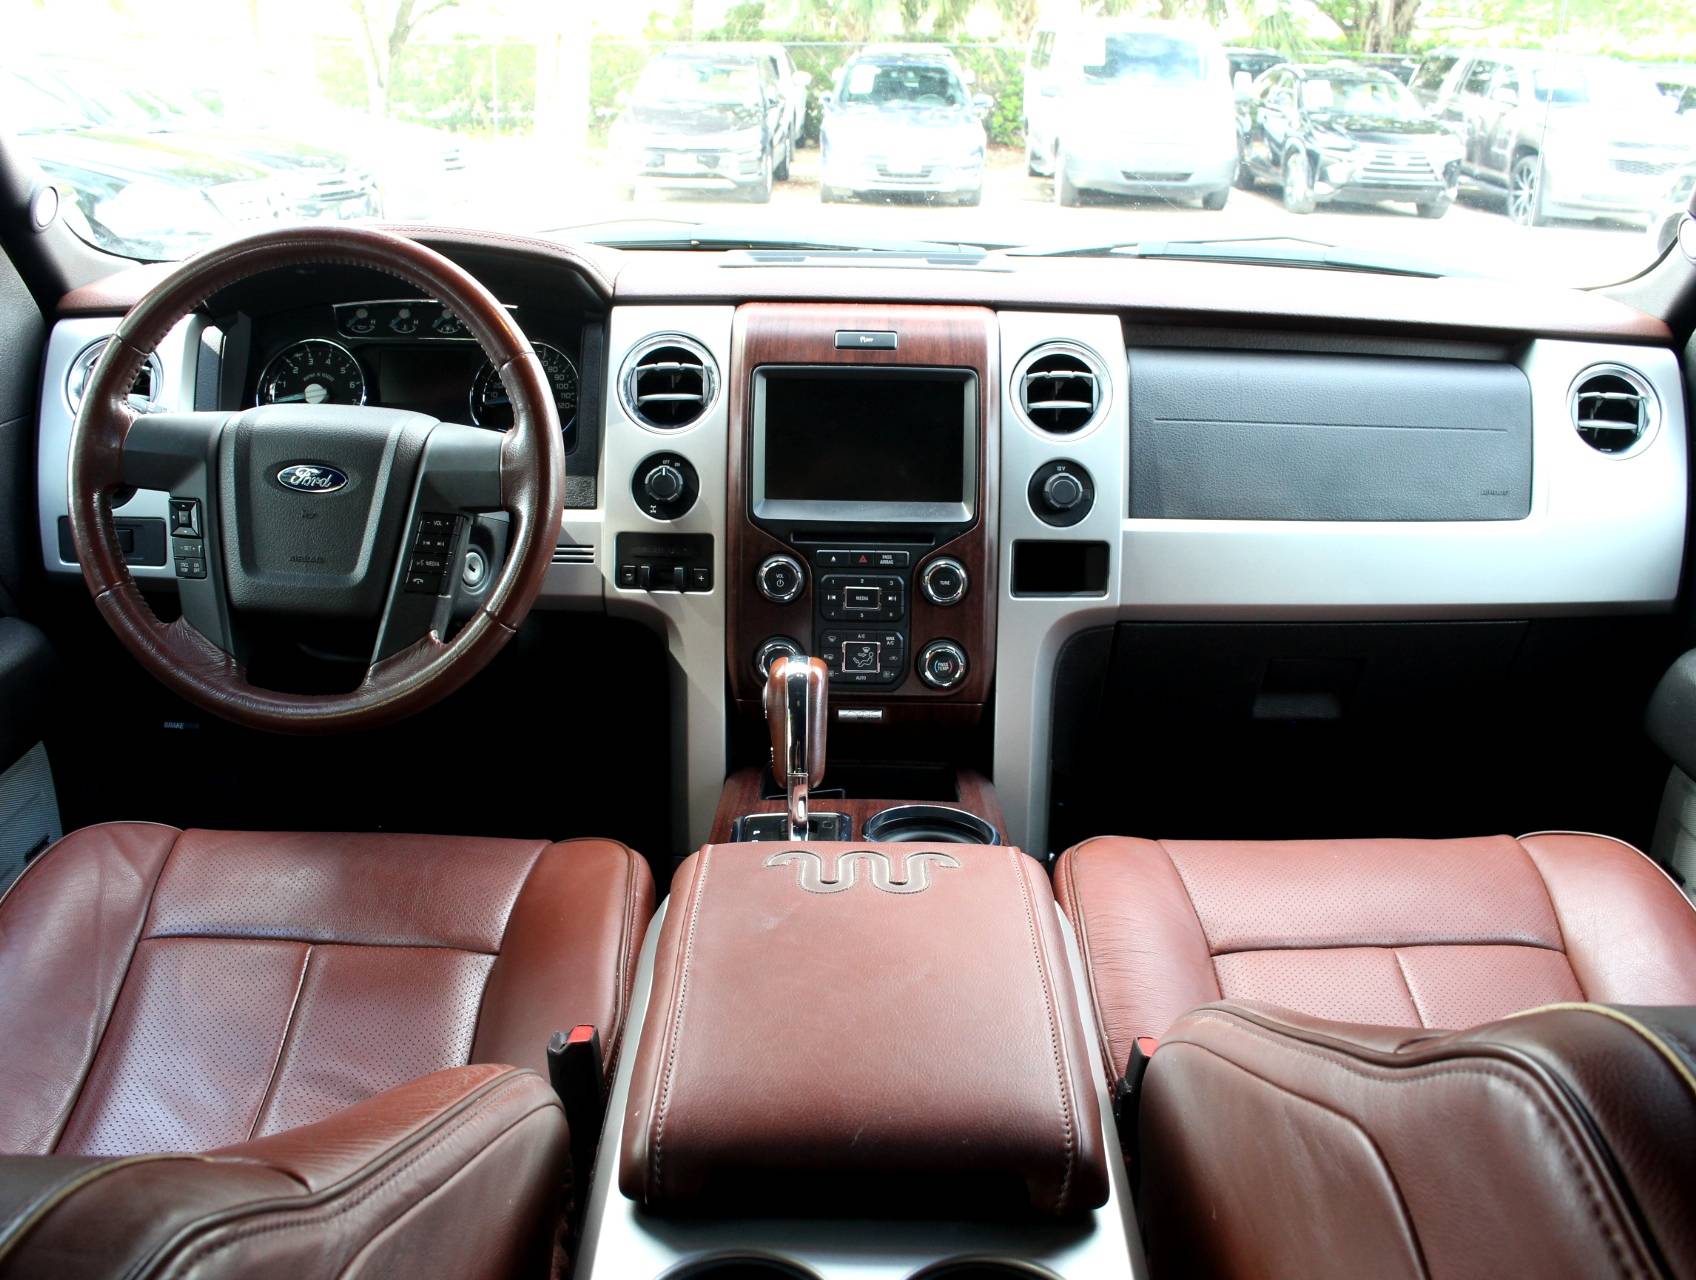 Florida Fine Cars - Used FORD F 150 2013 WEST PALM King Ranch